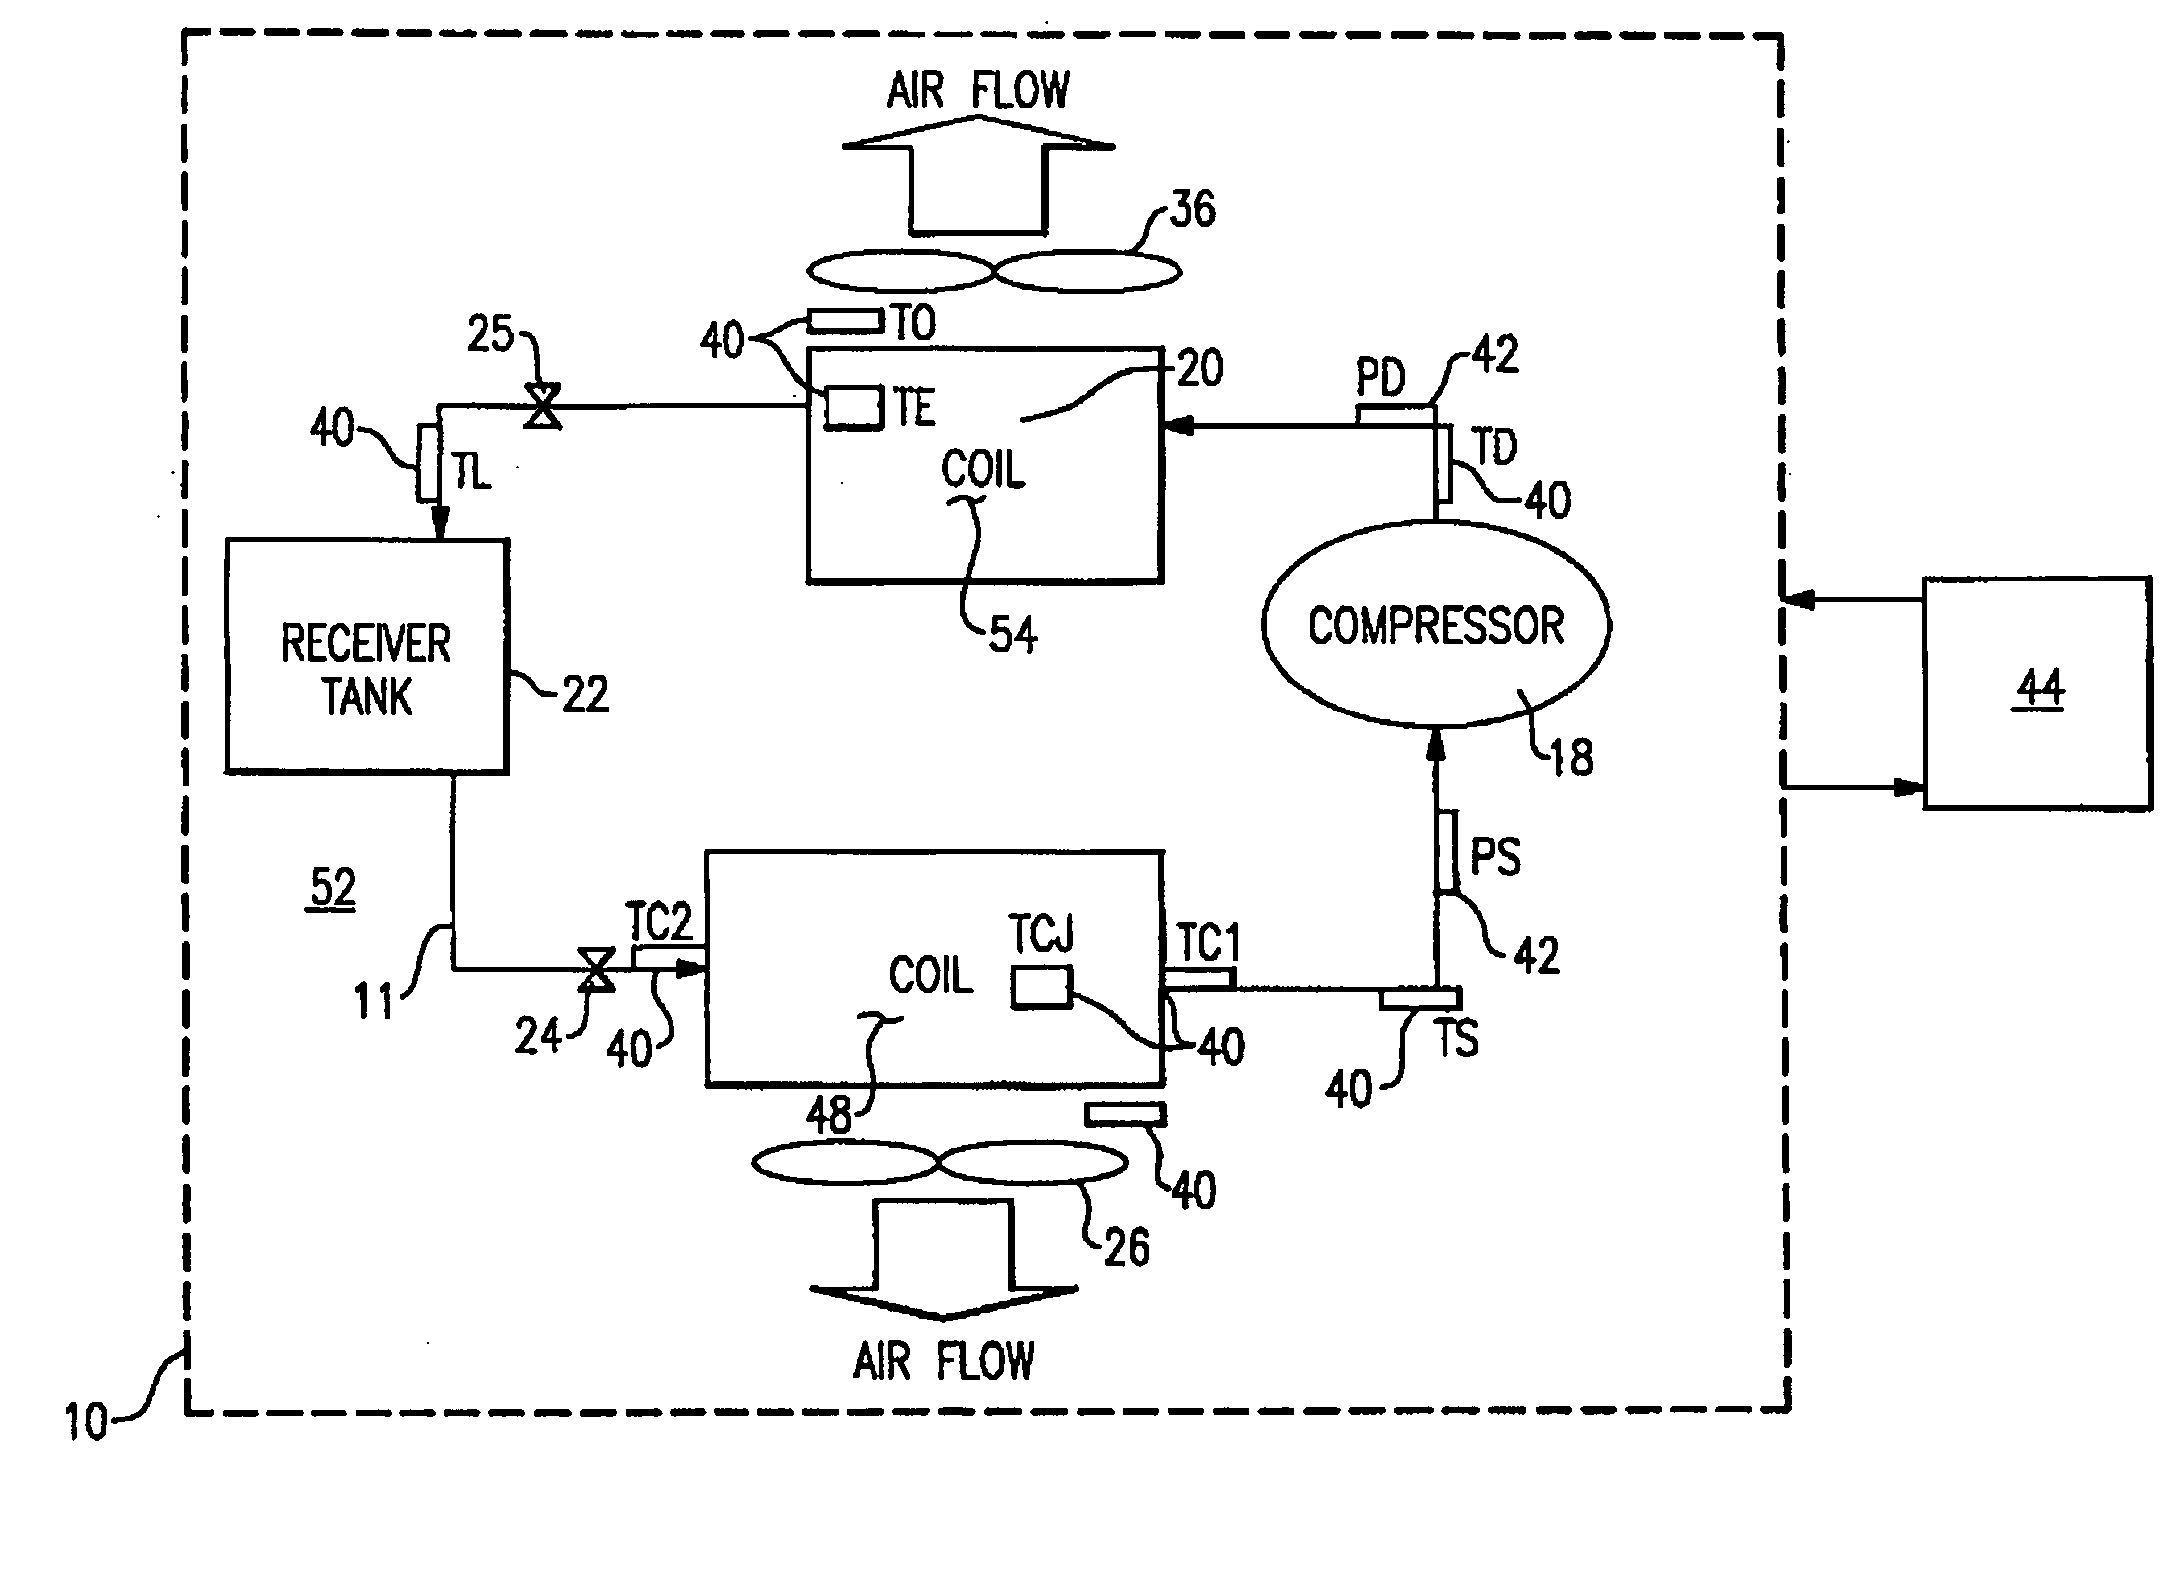 Charge loss detection and prognostics for multi-modular split systems